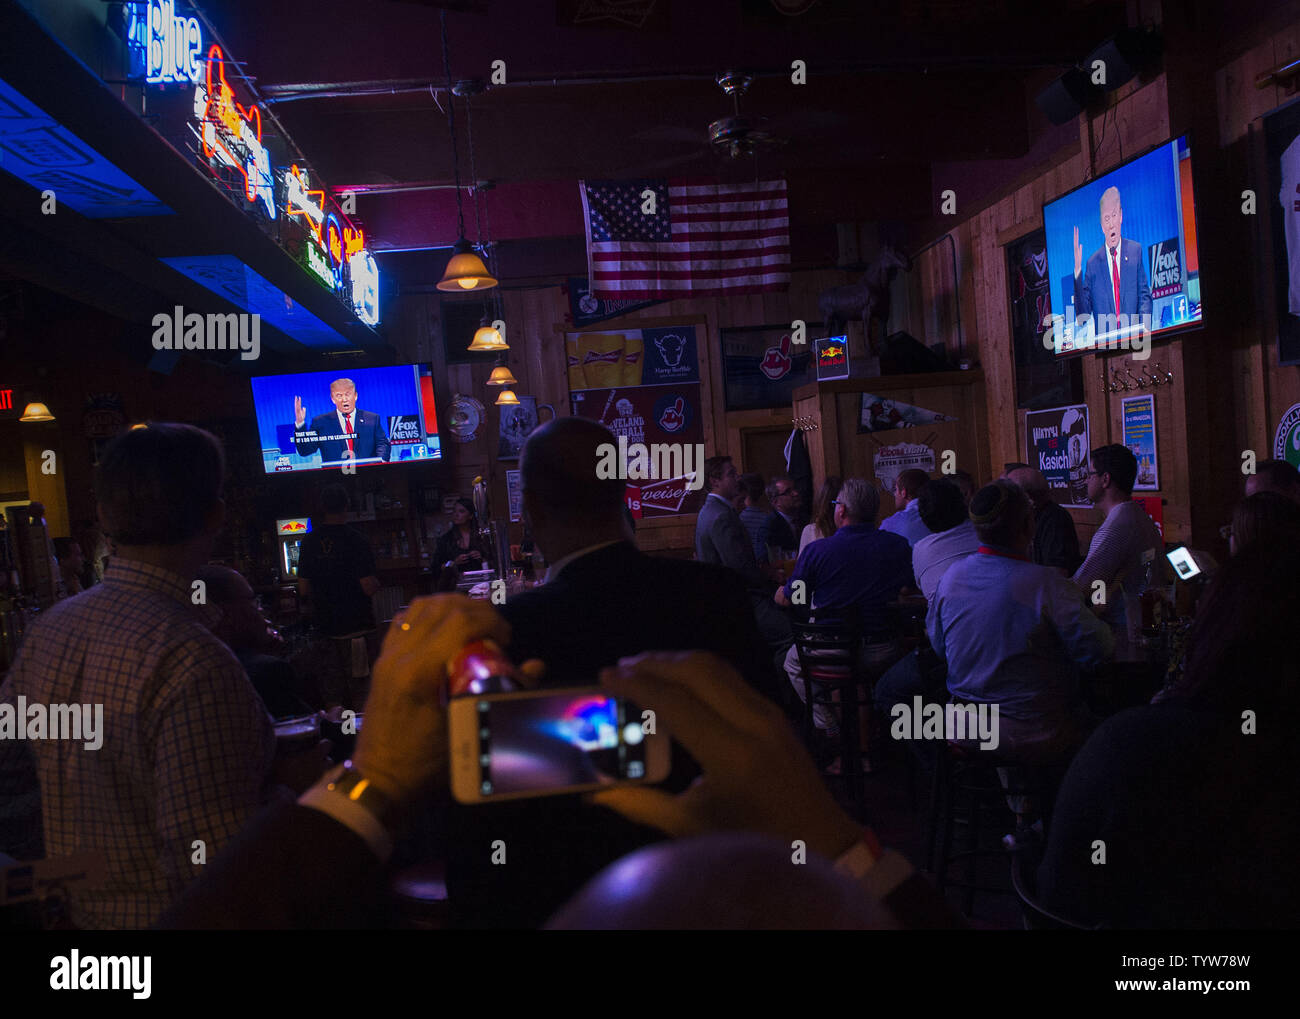 People attend a watch party for the Republican presidential debate at the Harry Buffalo bar in Cleveland, Ohio on August 6, 2015. The top ten candidates, Donald Trump, Jeb Bush, Scott Walker, Mike Huckabee, Ben Carson, Ted Cruz, Marco Rubio, Rand Paul, Chris Christie and John Kasich met in the first prime time debate for the 2016 presidential election while the six other major declared candidates, Rick Santorum, Bobby Jindal, Carly Fiorina, Lindsey Graham, George Pataki, and Jim Gilmore, participated in an earlier debate.  Photo by Kevin Dietsch/UPI Stock Photo